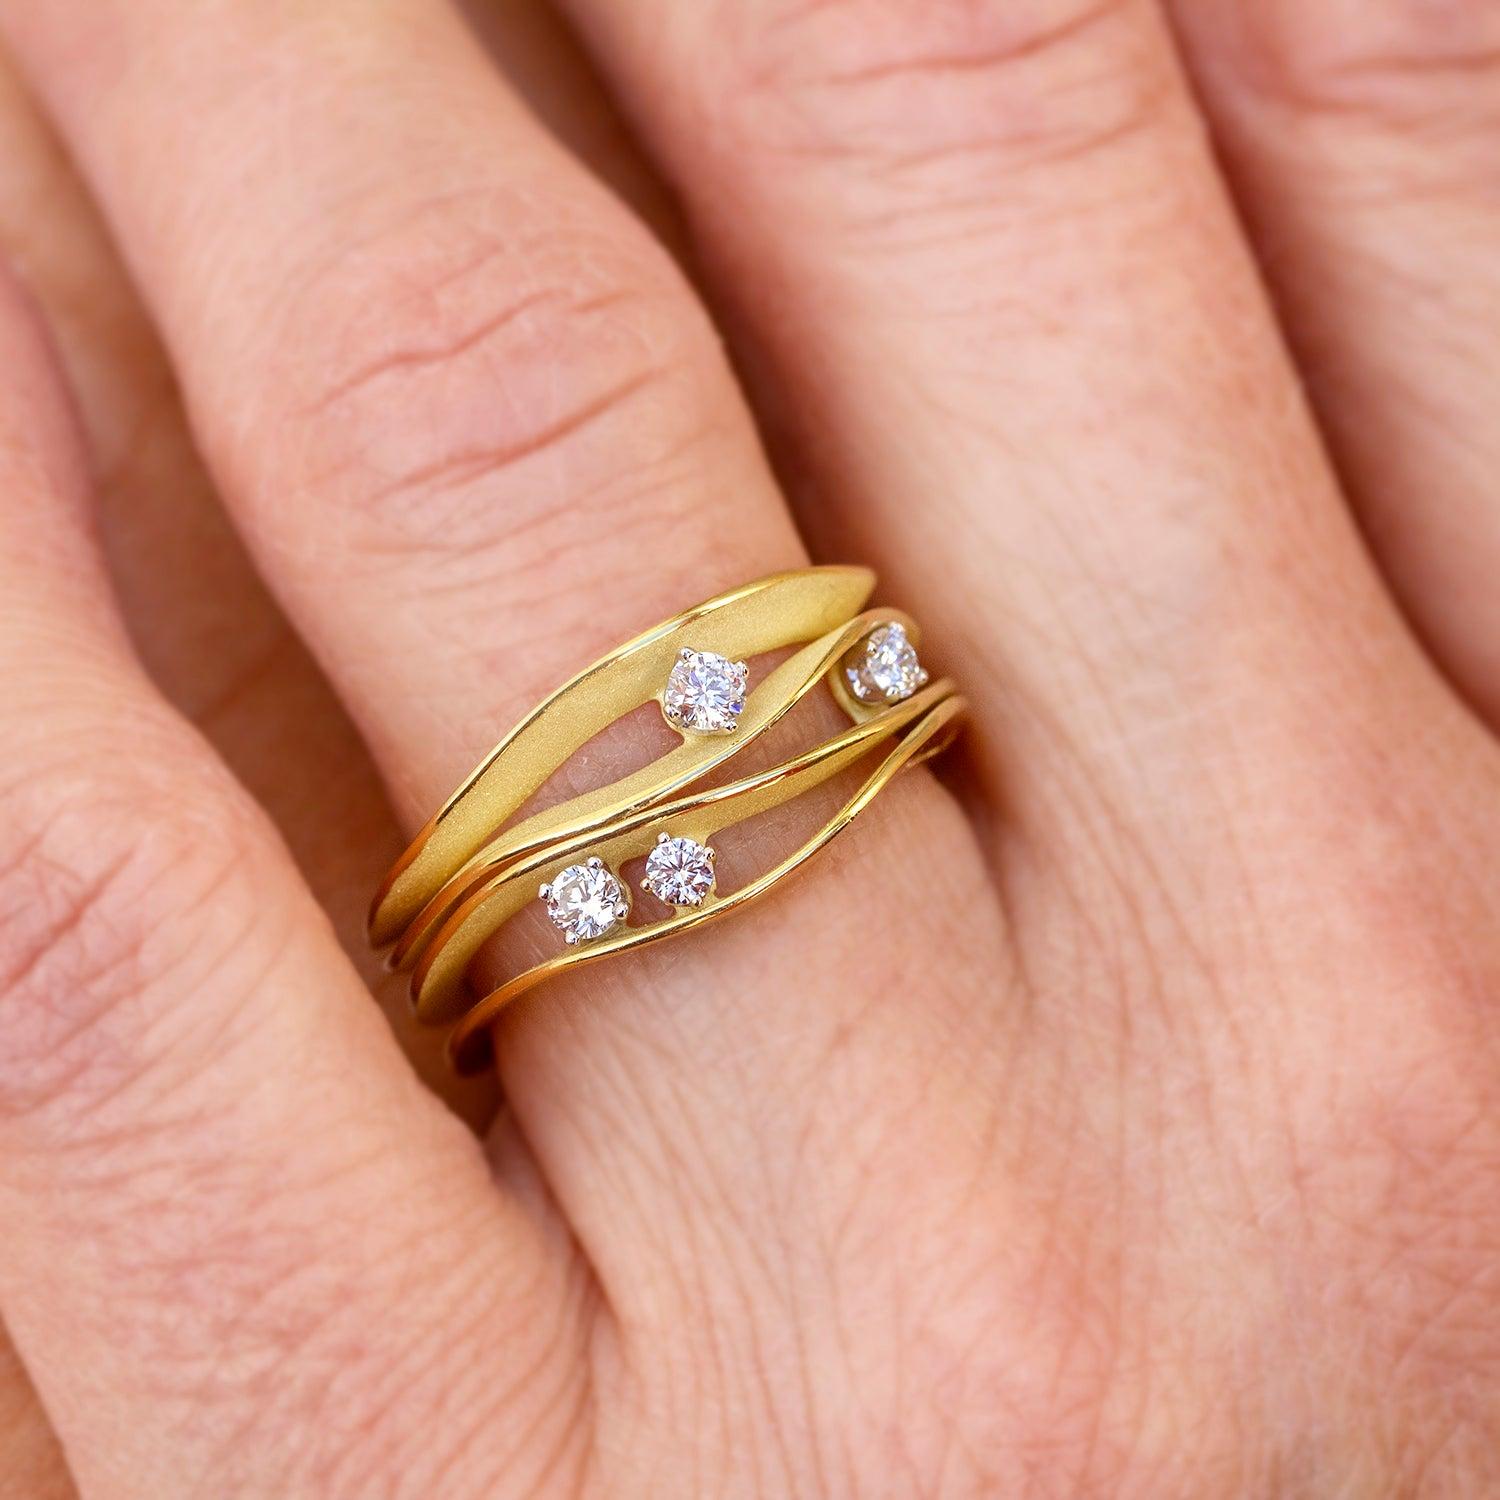 For Sale:  Annamaria Cammilli Dune Ring with Four Diamonds in 18 Karat Lemon Bamboo Gold 5